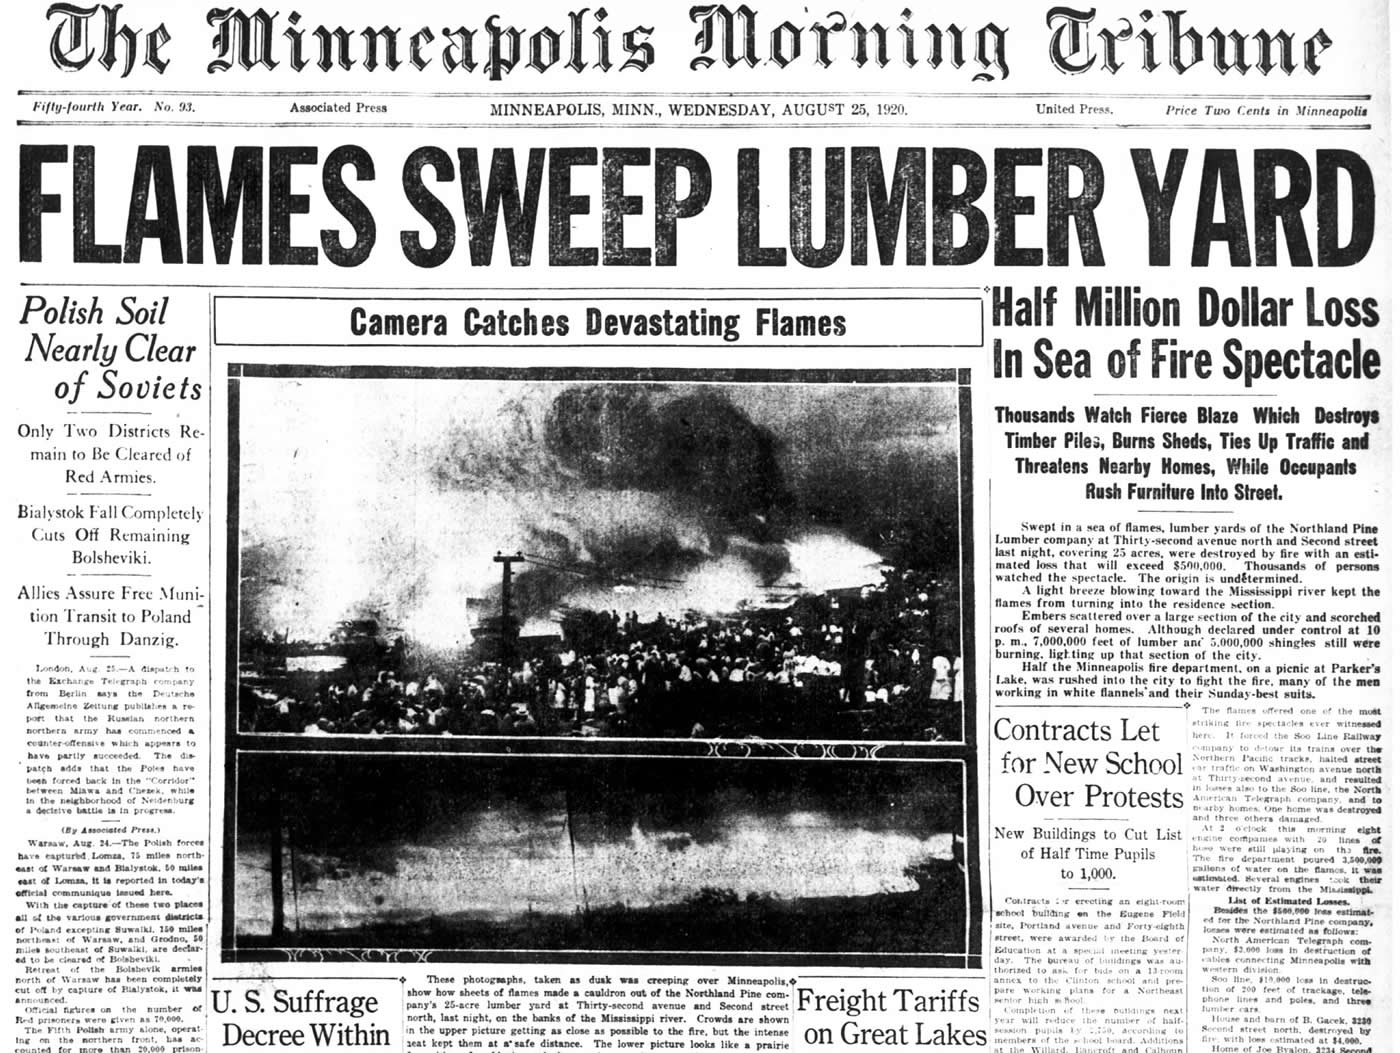 Front page of newspaper with headline and photo of the Northland Pine Company fire, August 25, 1920.